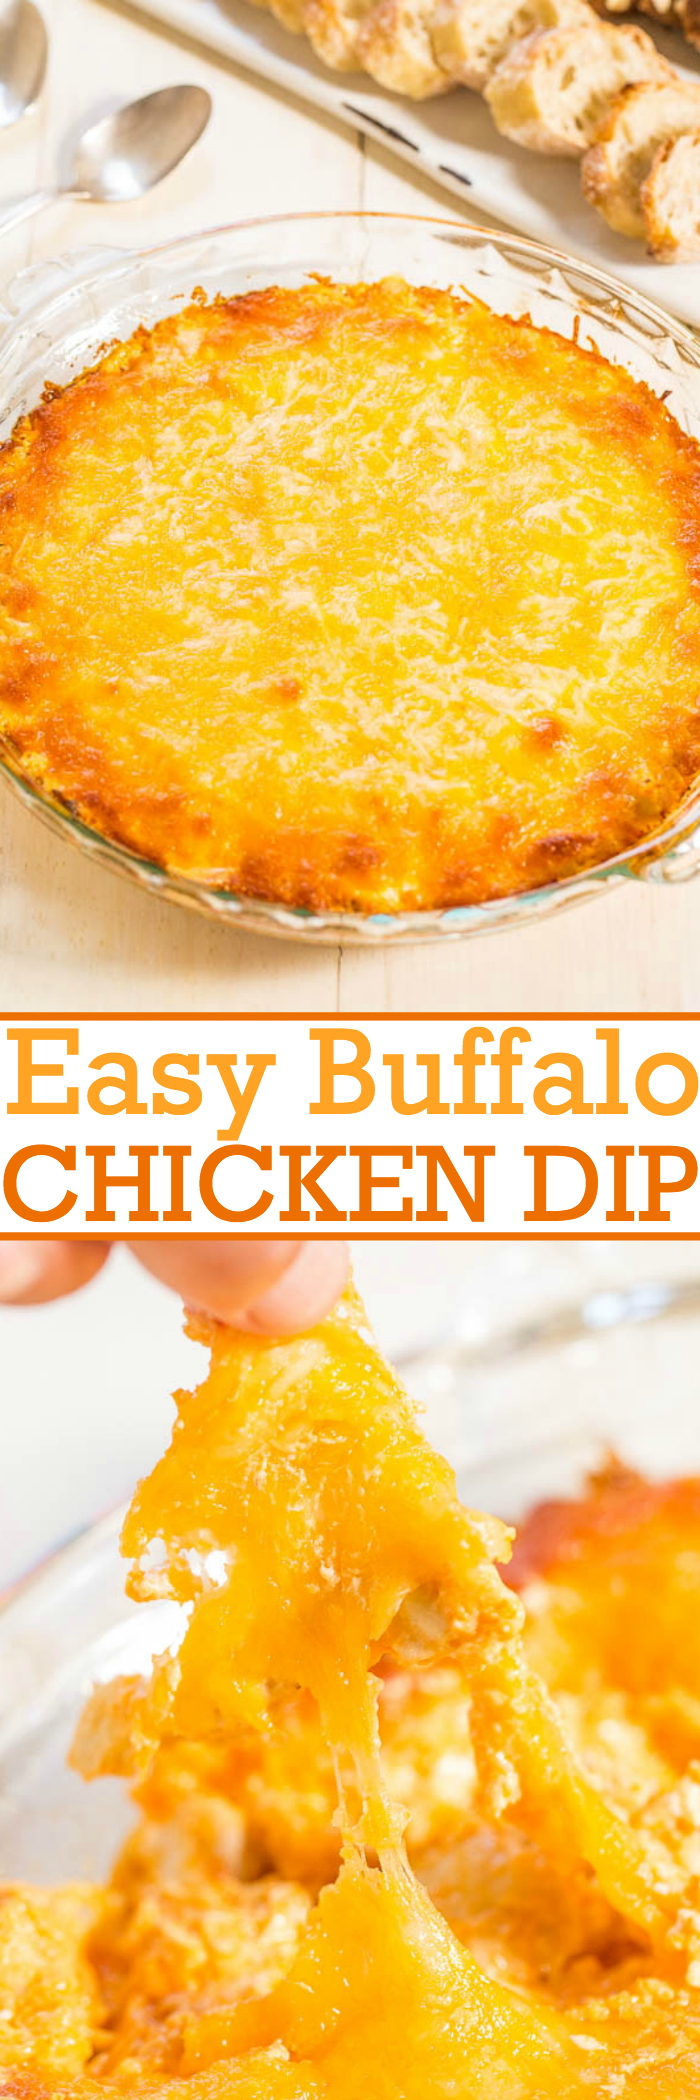 Easy Buffalo Chicken Dip - Cheese, cream cheese, and chicken combined in a fast and easy dip!! Total comfort food that'll be devoured at any party!! Great for game day parties!